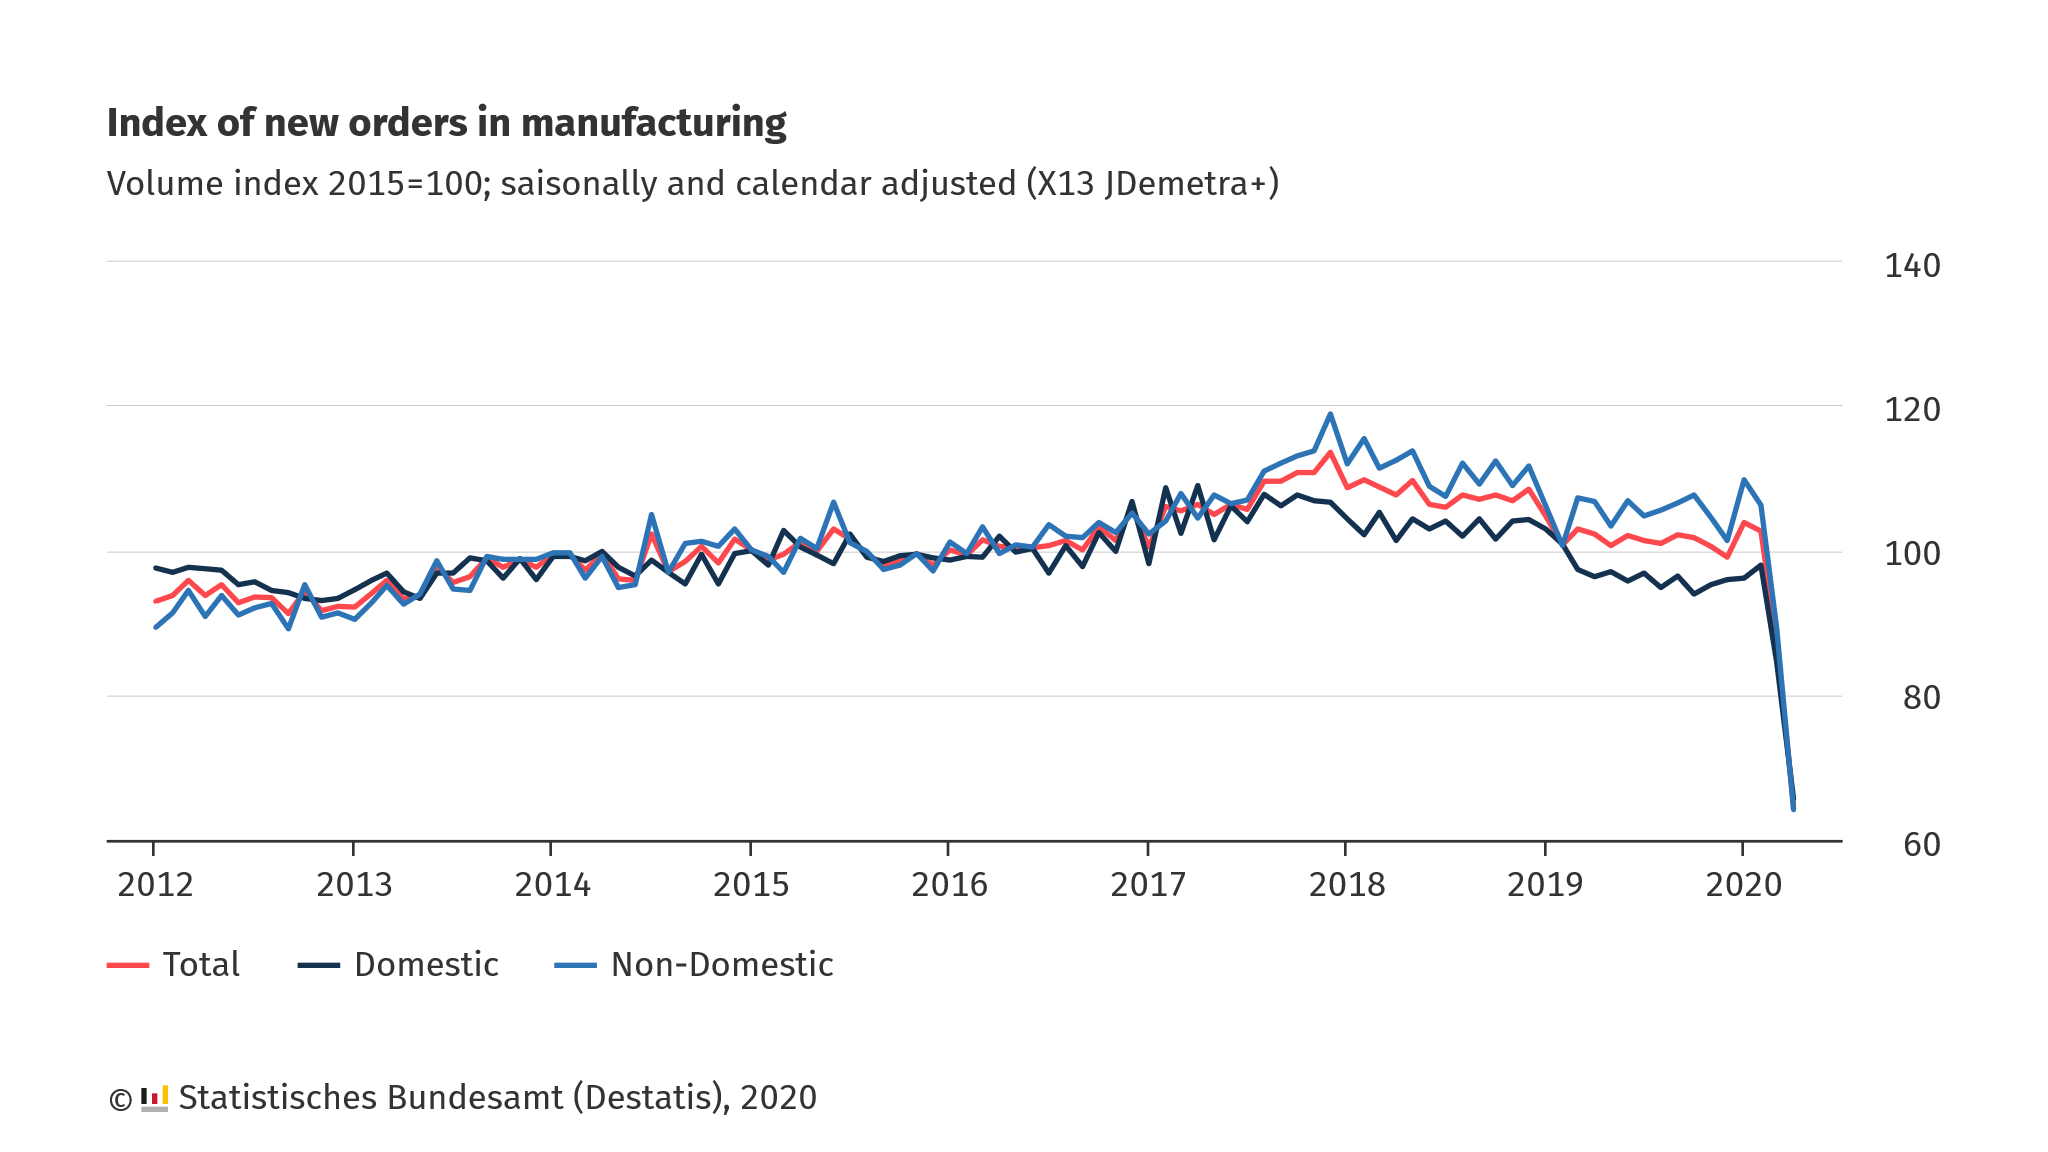 Manufacturing in April 2020: new orders -25.8% (seasonally adjusted) on the previous month